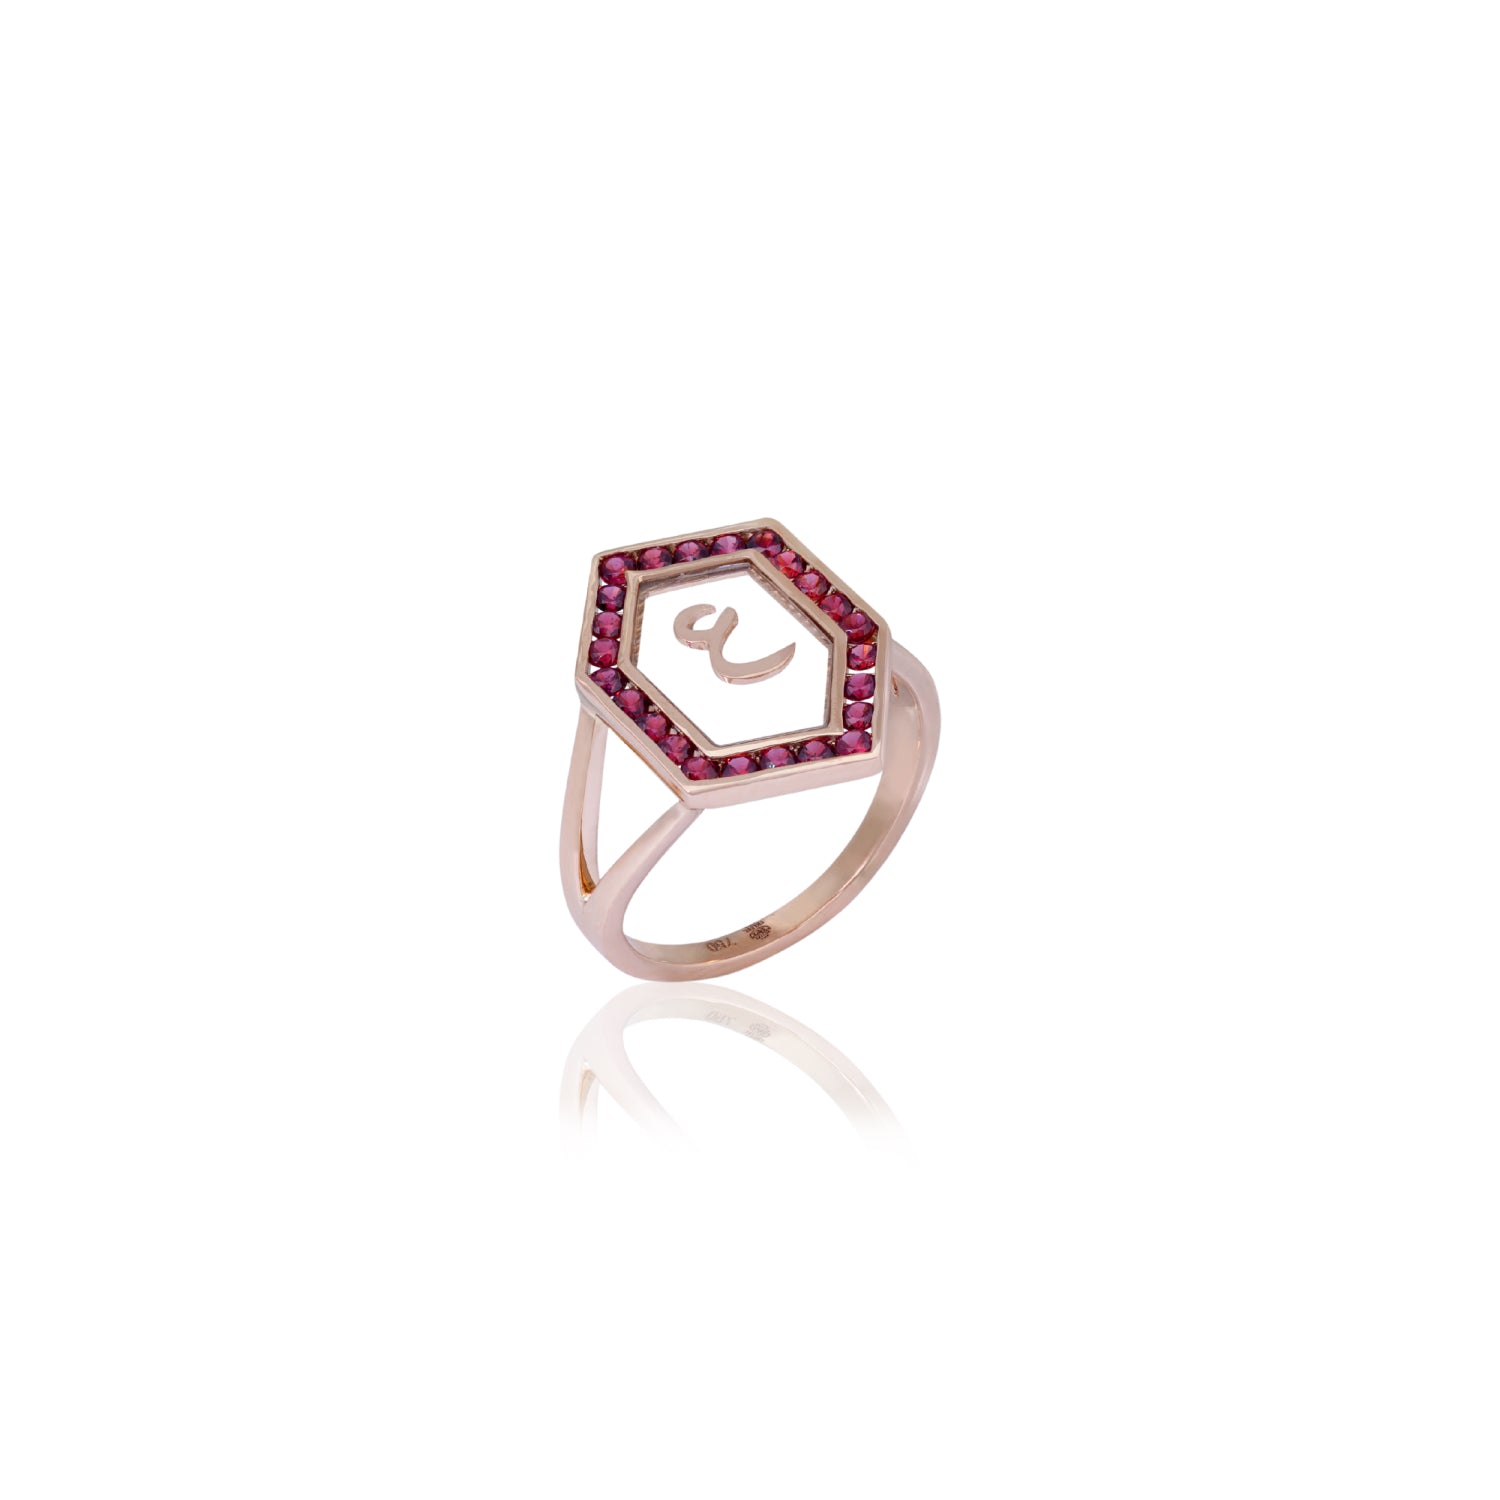 Qamoos 1.0 Letter ع Ruby Ring in Rose Gold